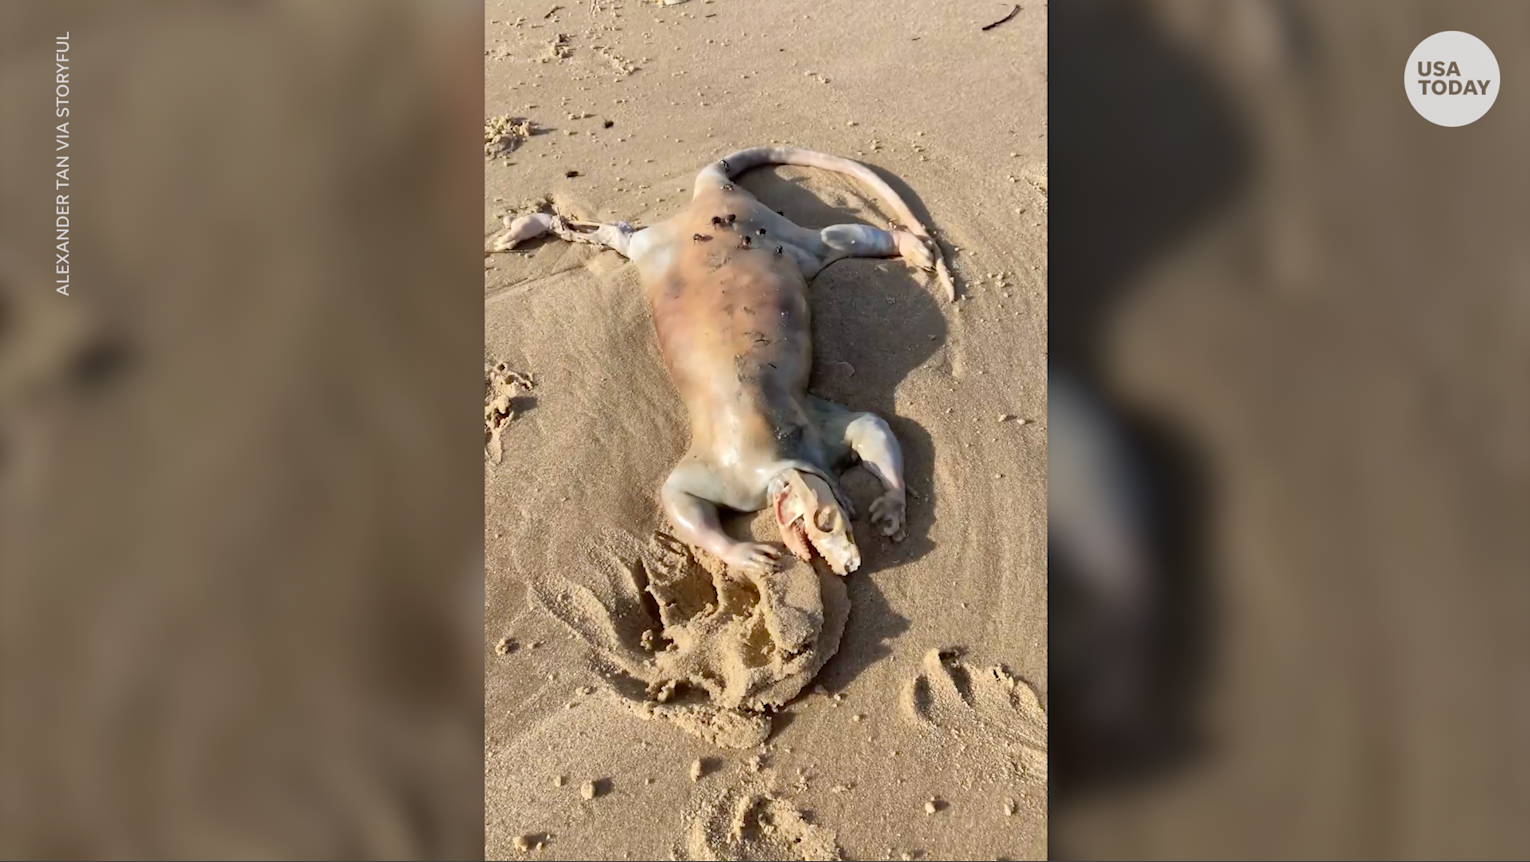 Man finds 'alien' that looks like 'dehaired possum' with claws washed up on Australian beach thumbnail